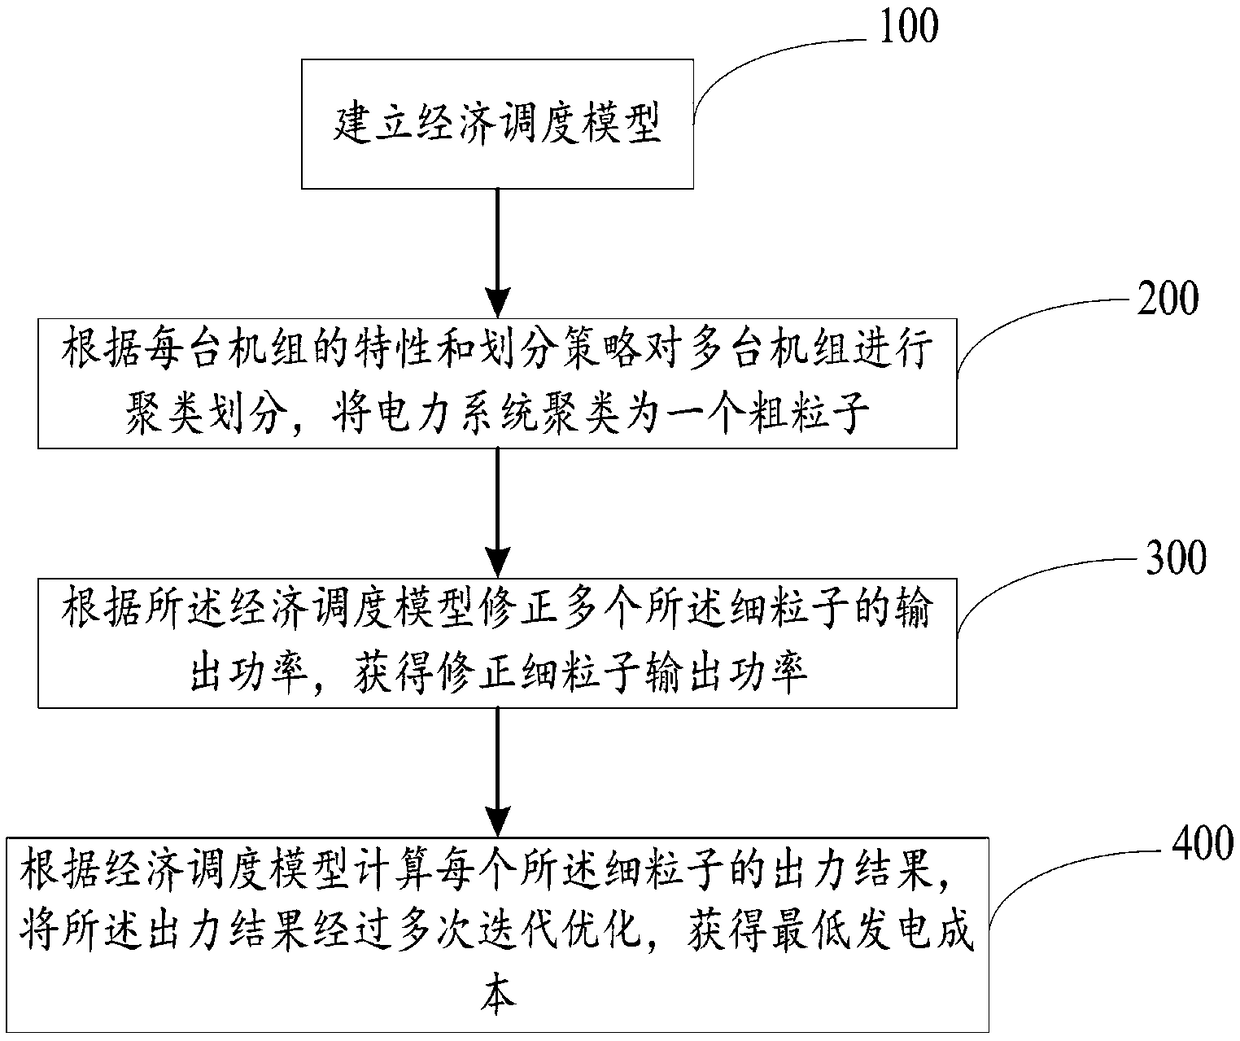 A method and system for economical dispatch of electric power system